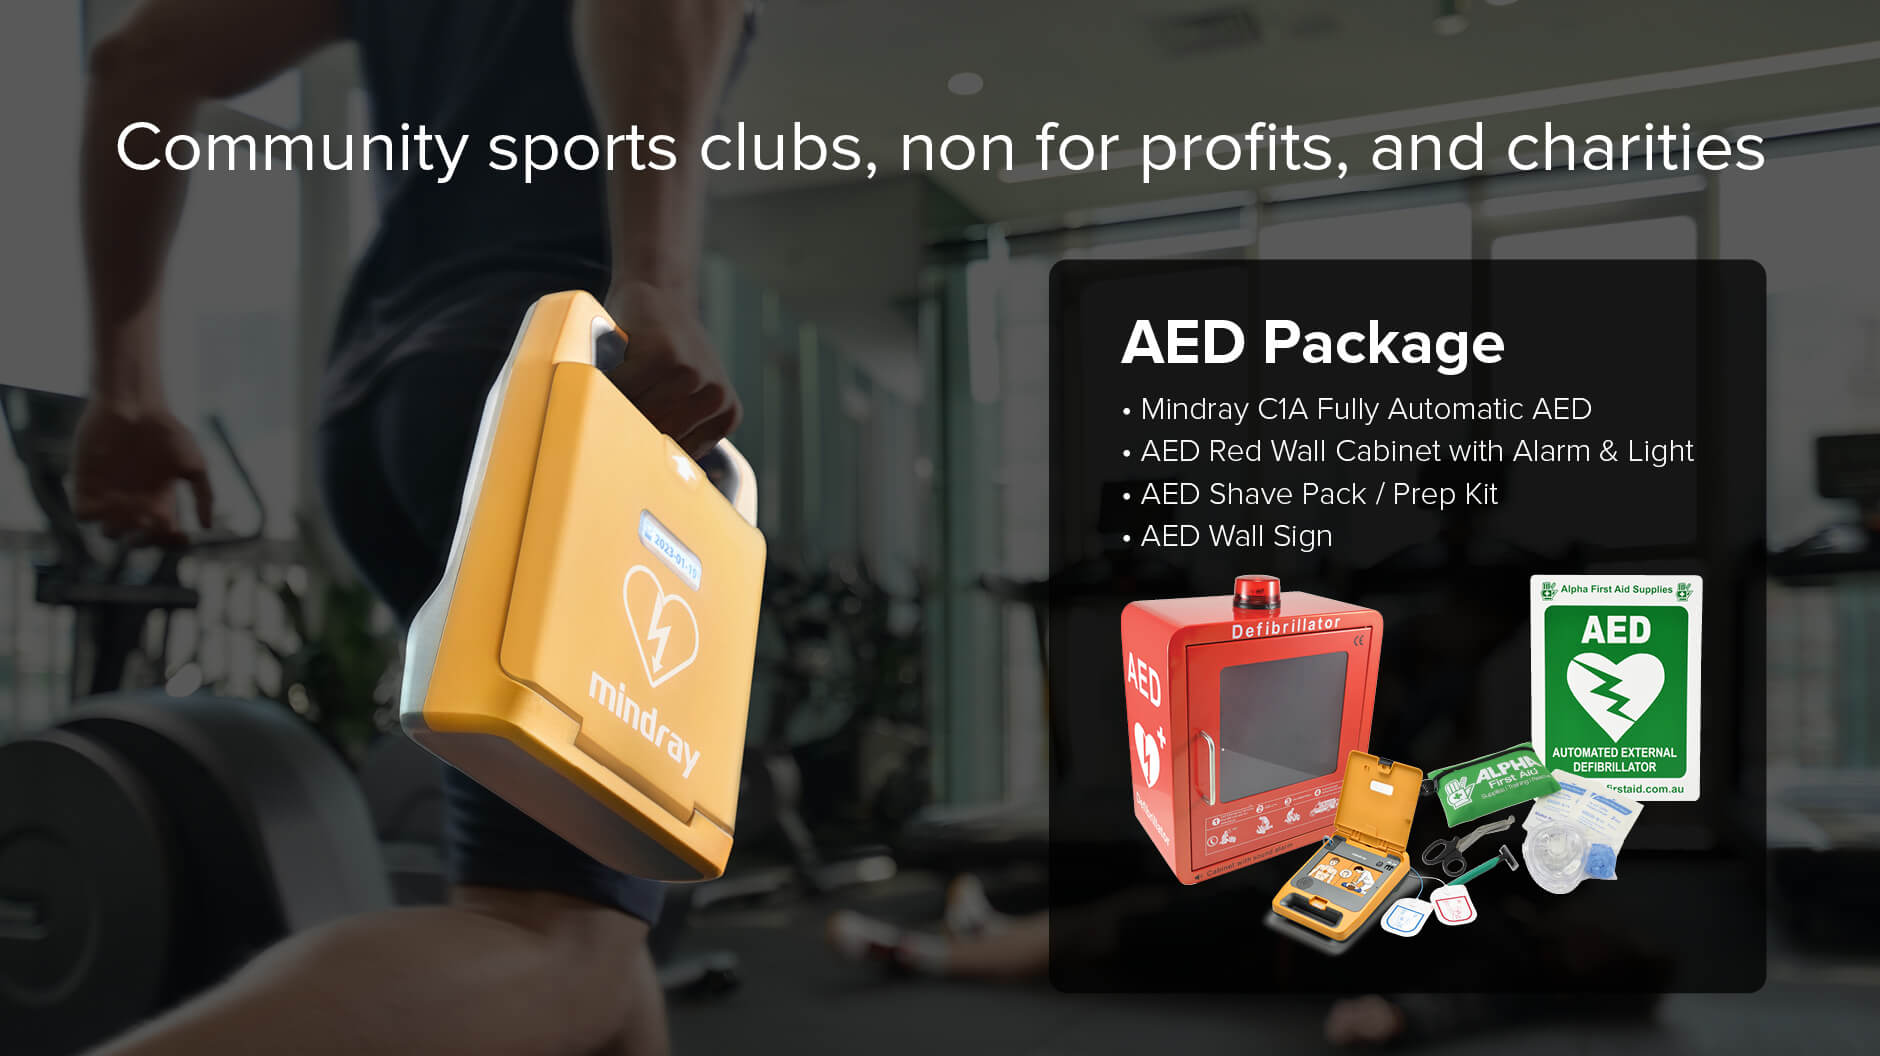 Community sports clubs, non for profits, and charities - AED Club Grant Package